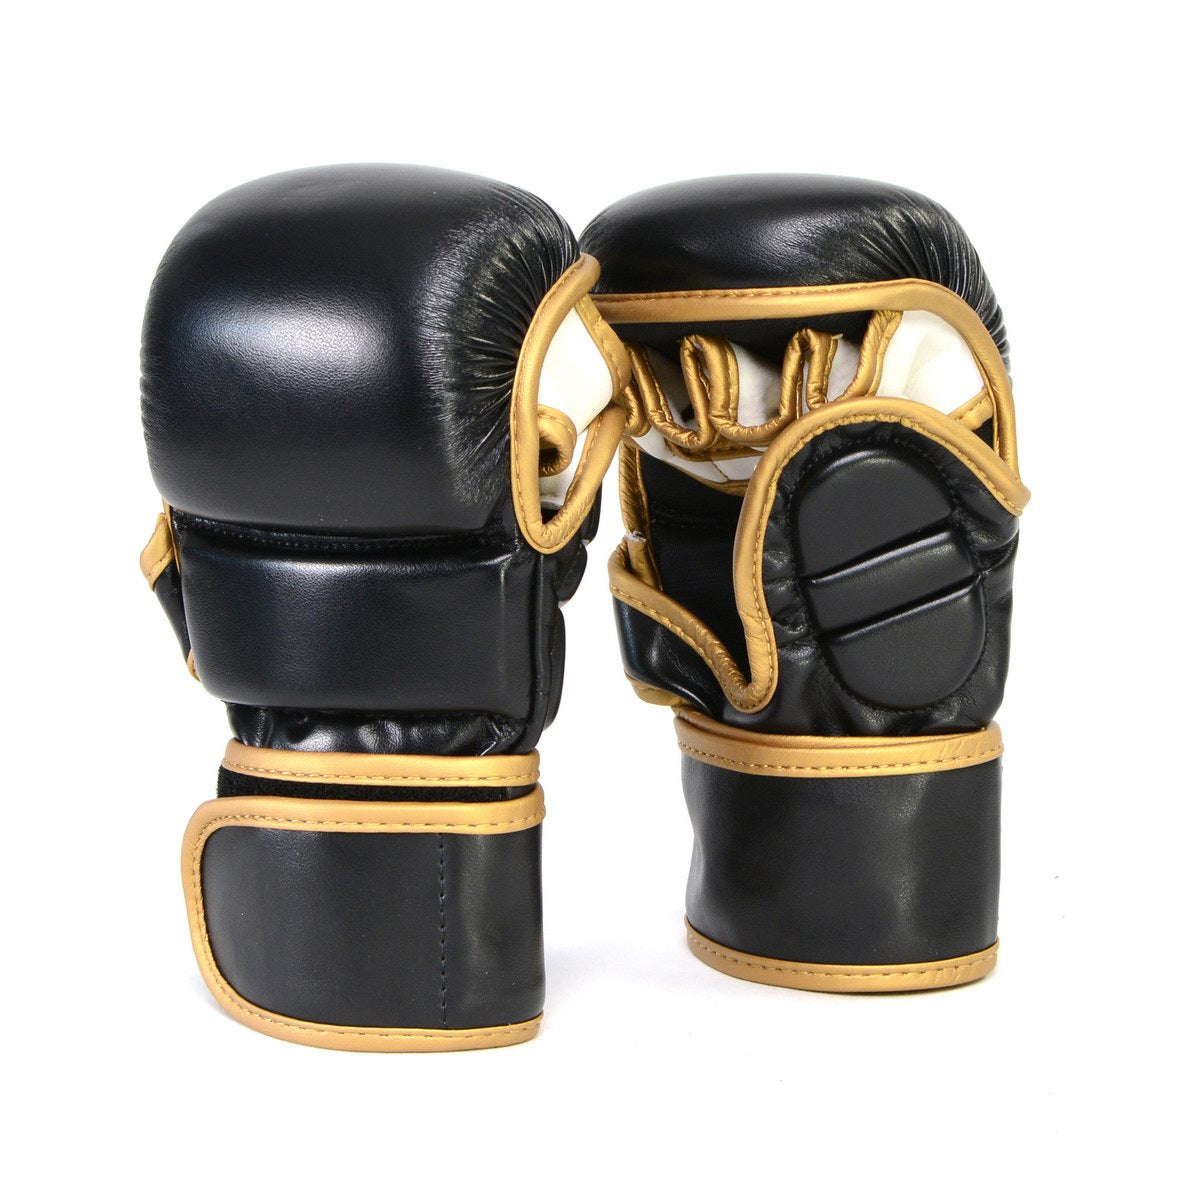 MMA oz Gloves-BLK/COPPER Sparring 7 Hybrid X-Fitness XF2001 –